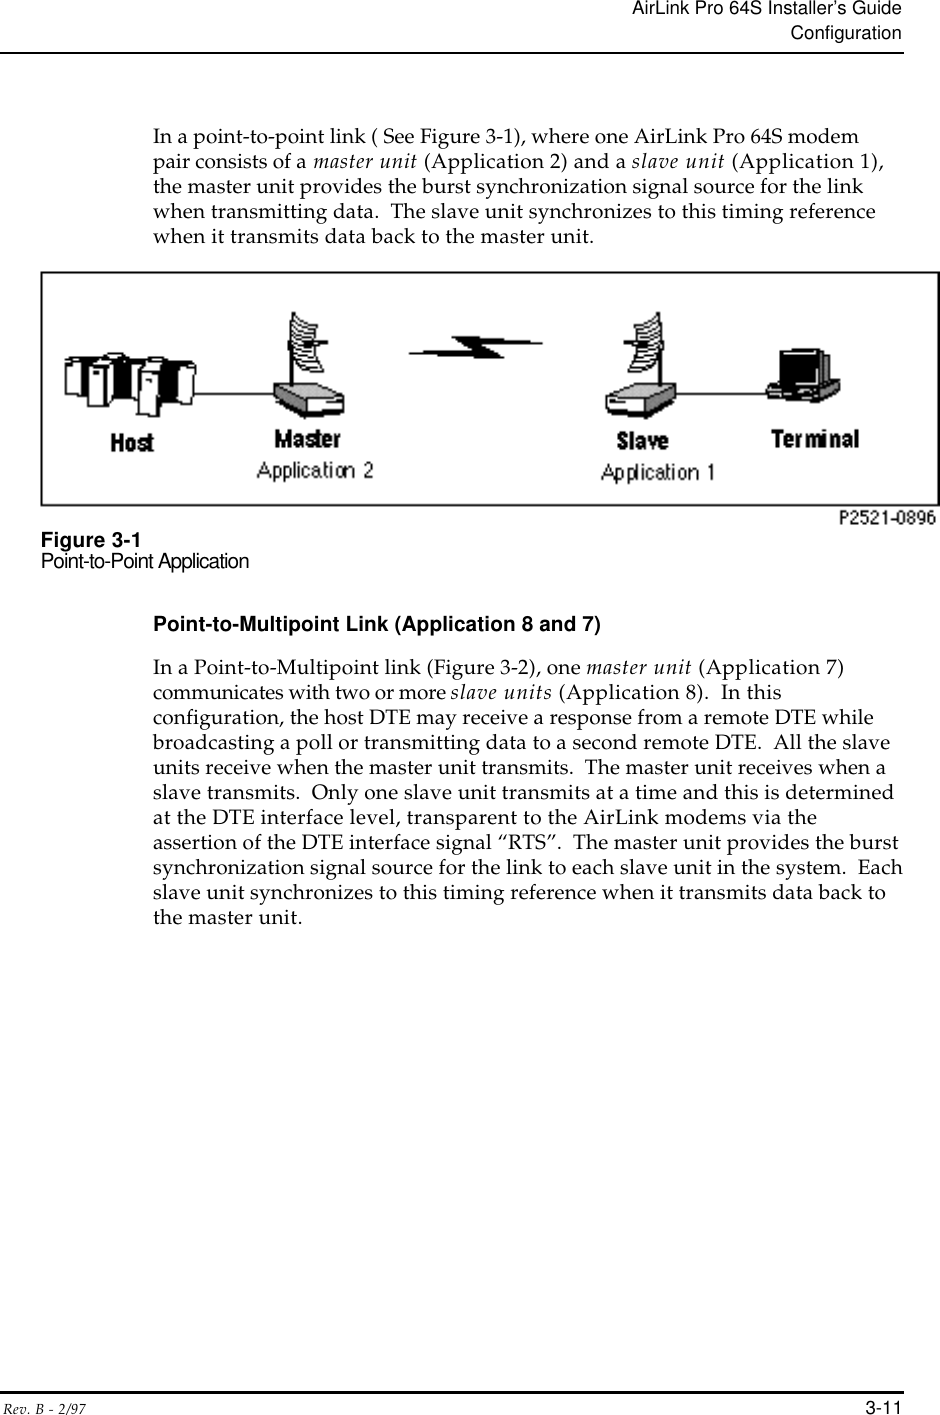 AirLink Pro 64S Installer’s GuideConfigurationRev. B - 2/97 3-11In a point-to-point link ( See Figure 3-1), where one AirLink Pro 64S modempair consists of a master unit (Application 2) and a slave unit (Application 1),the master unit provides the burst synchronization signal source for the linkwhen transmitting data.  The slave unit synchronizes to this timing referencewhen it transmits data back to the master unit.Figure 3-1Point-to-Point ApplicationPoint-to-Multipoint Link (Application 8 and 7)In a Point-to-Multipoint link (Figure 3-2), one master unit (Application 7)communicates with two or more slave units (Application 8).  In thisconfiguration, the host DTE may receive a response from a remote DTE whilebroadcasting a poll or transmitting data to a second remote DTE.  All the slaveunits receive when the master unit transmits.  The master unit receives when aslave transmits.  Only one slave unit transmits at a time and this is determinedat the DTE interface level, transparent to the AirLink modems via theassertion of the DTE interface signal “RTS”.  The master unit provides the burstsynchronization signal source for the link to each slave unit in the system.  Eachslave unit synchronizes to this timing reference when it transmits data back tothe master unit.